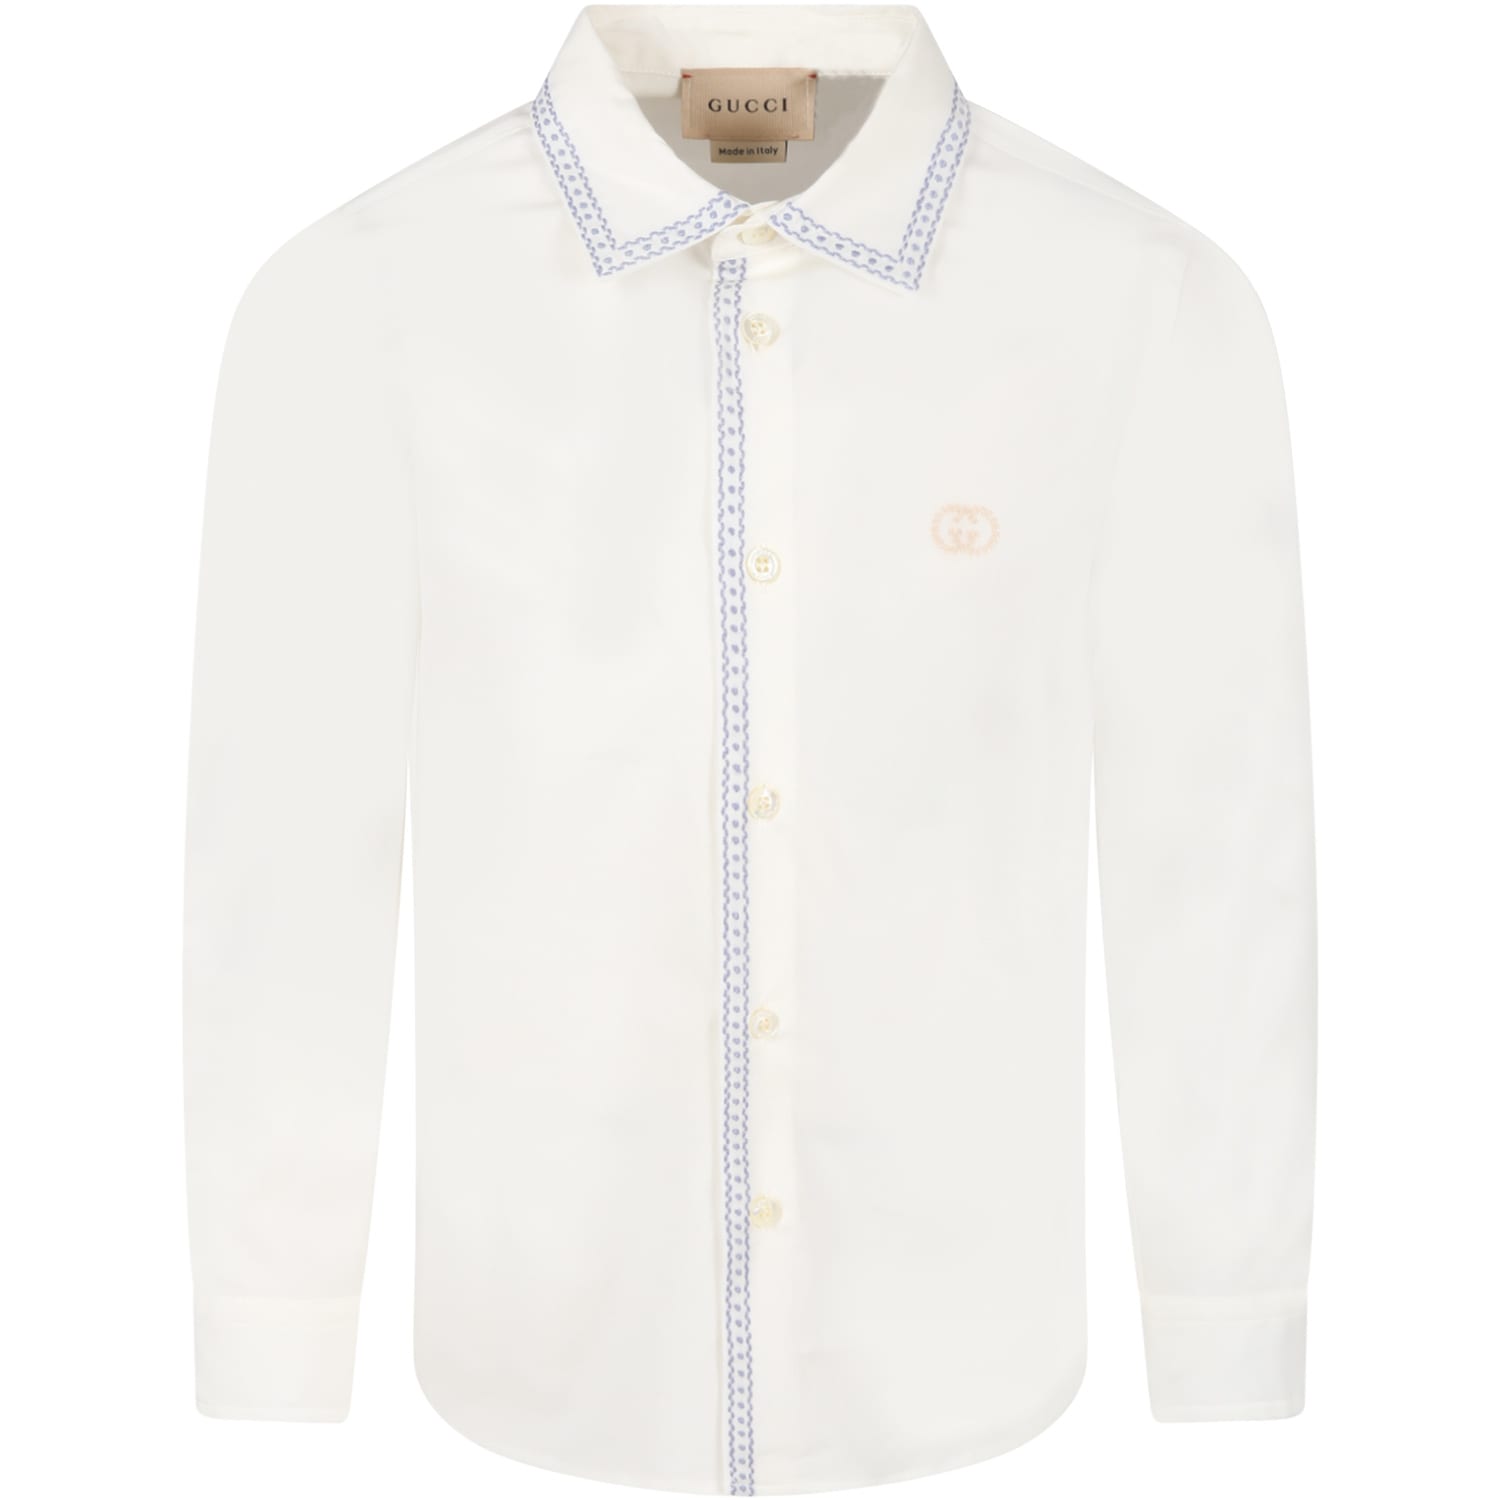 Gucci White Shirt For Kids With Double Gg